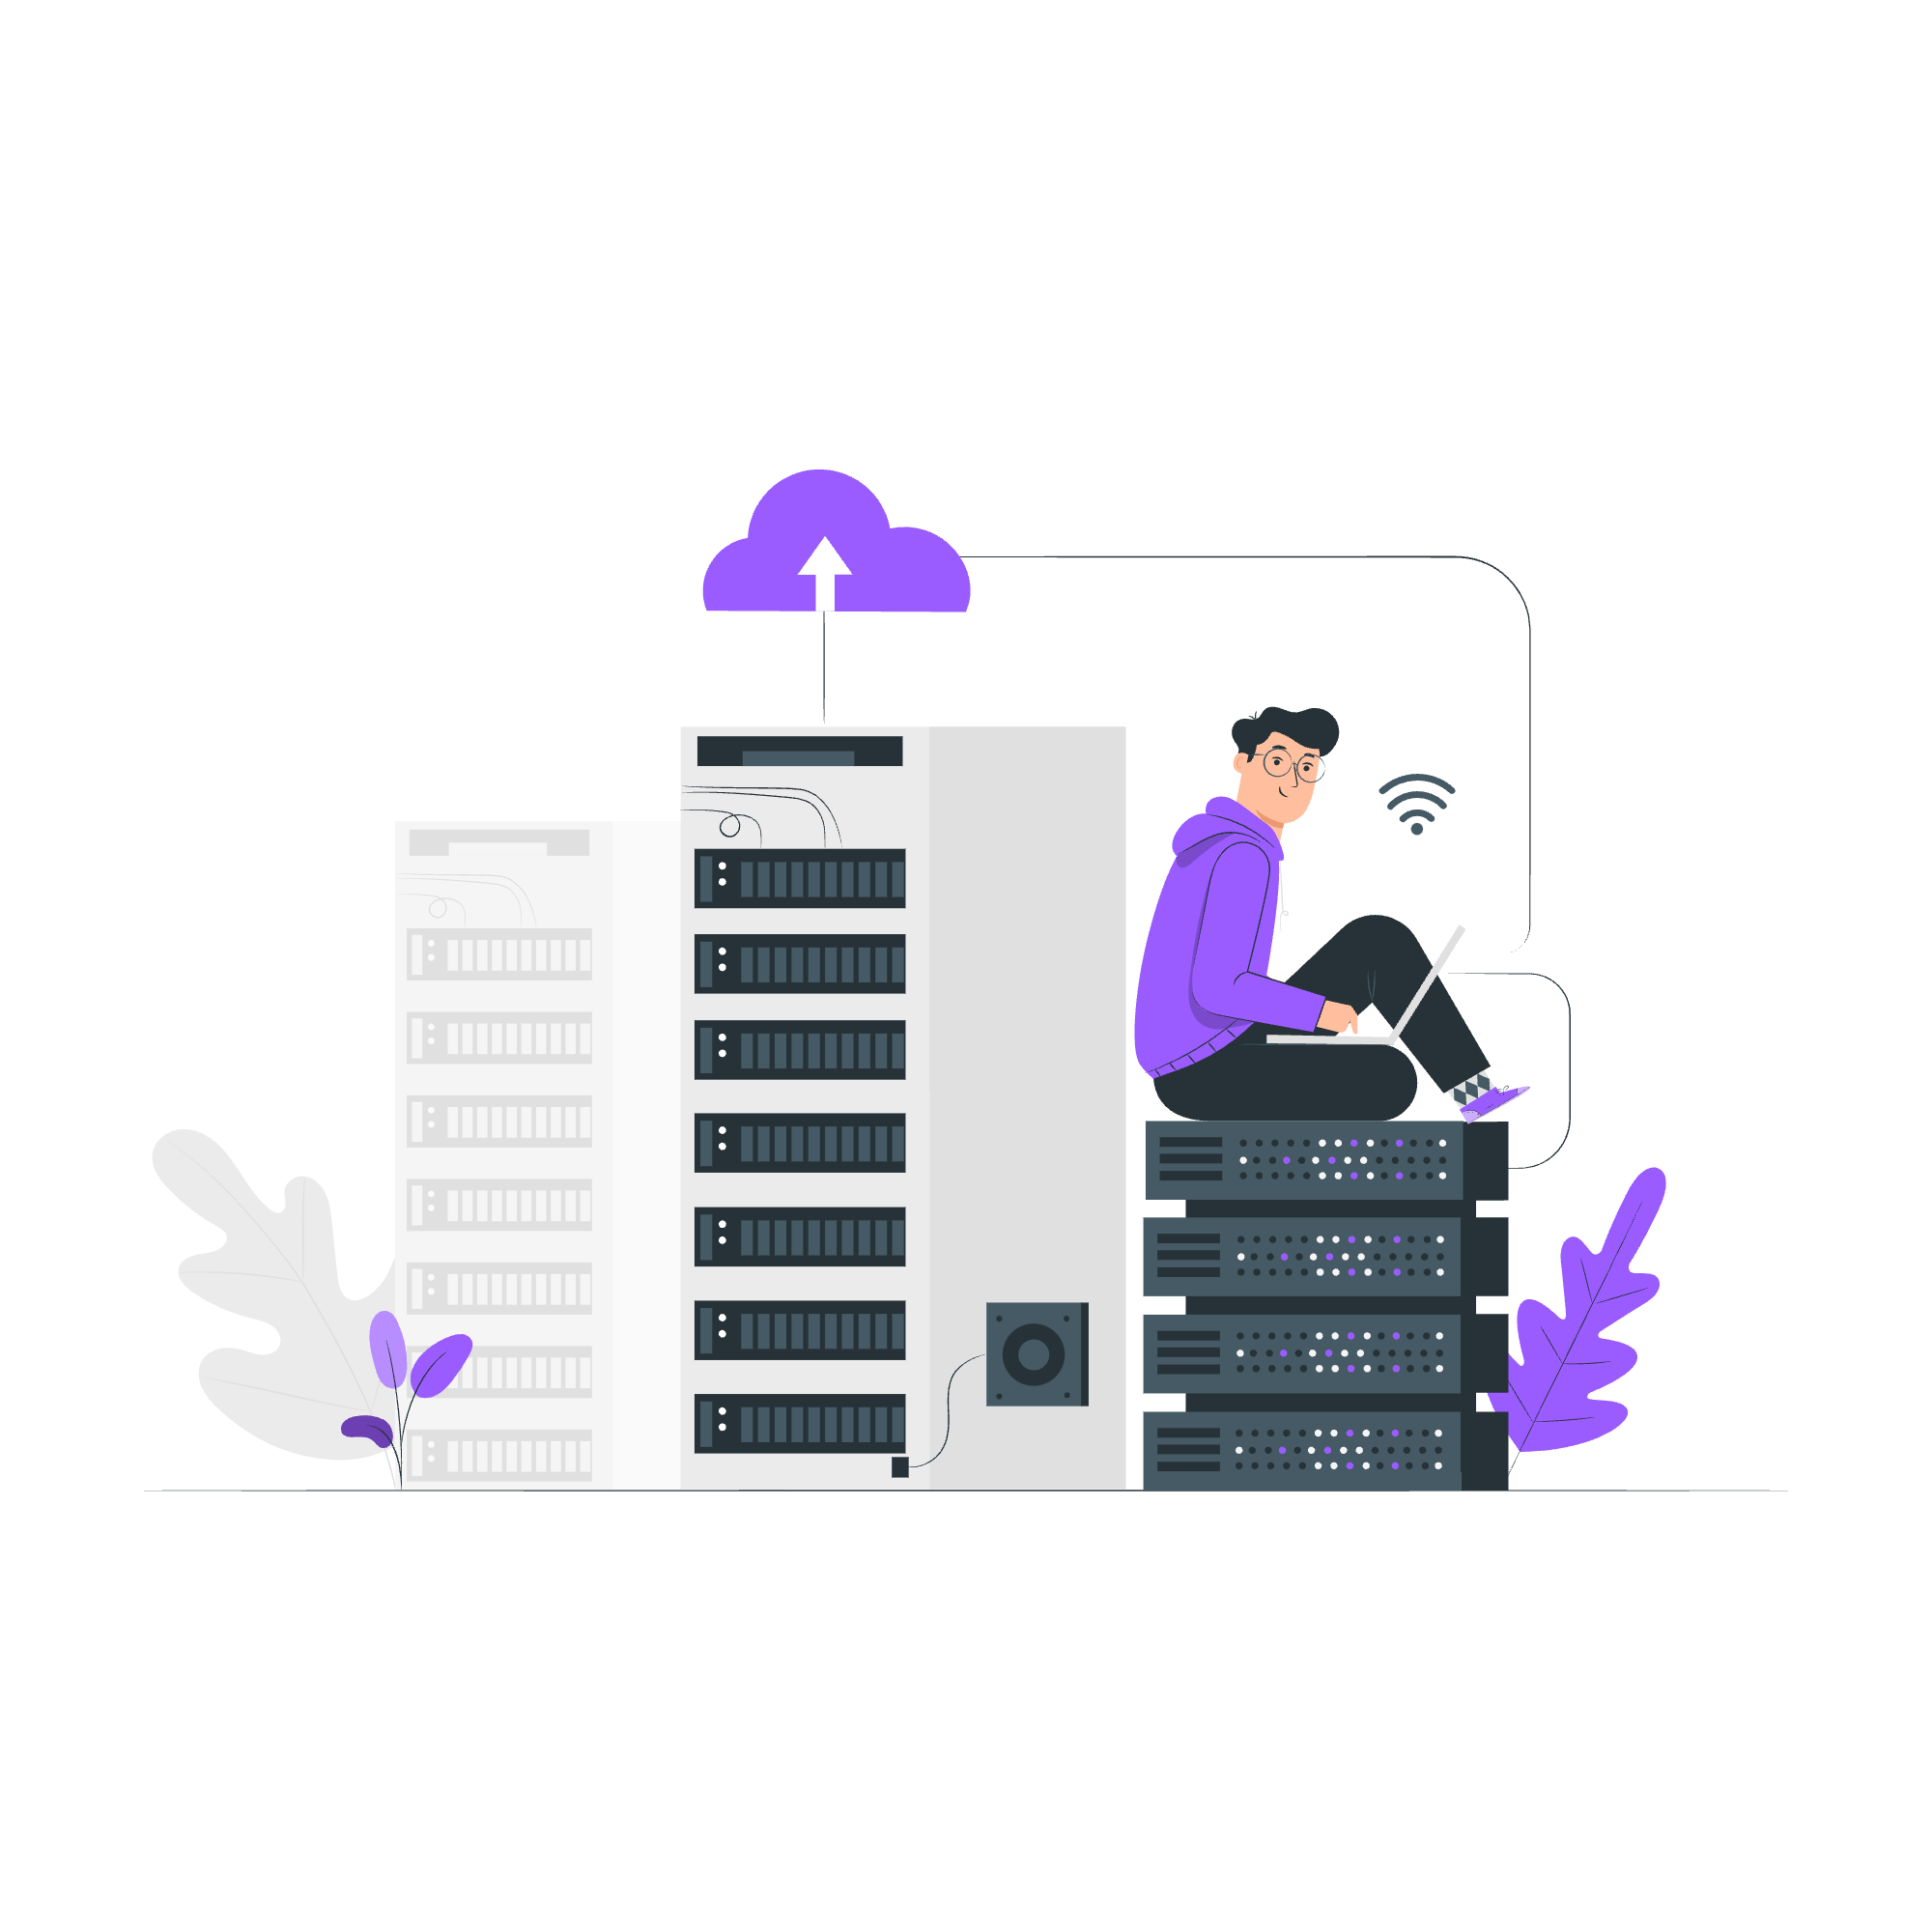 A man is sitting on a server meant to symbolize the hosting & domains solution